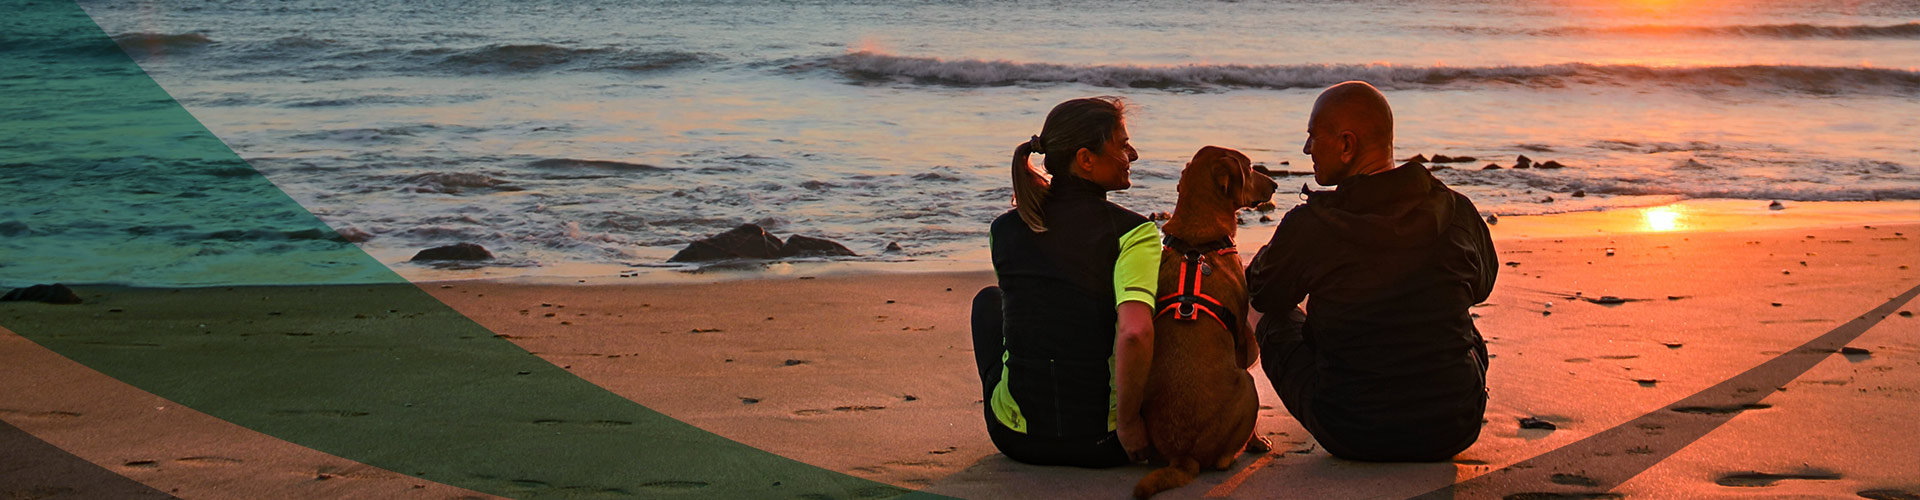 picture-of-a-man-a-woman-and-their-dog-sitting-by-the-beach-dartmouth-ma